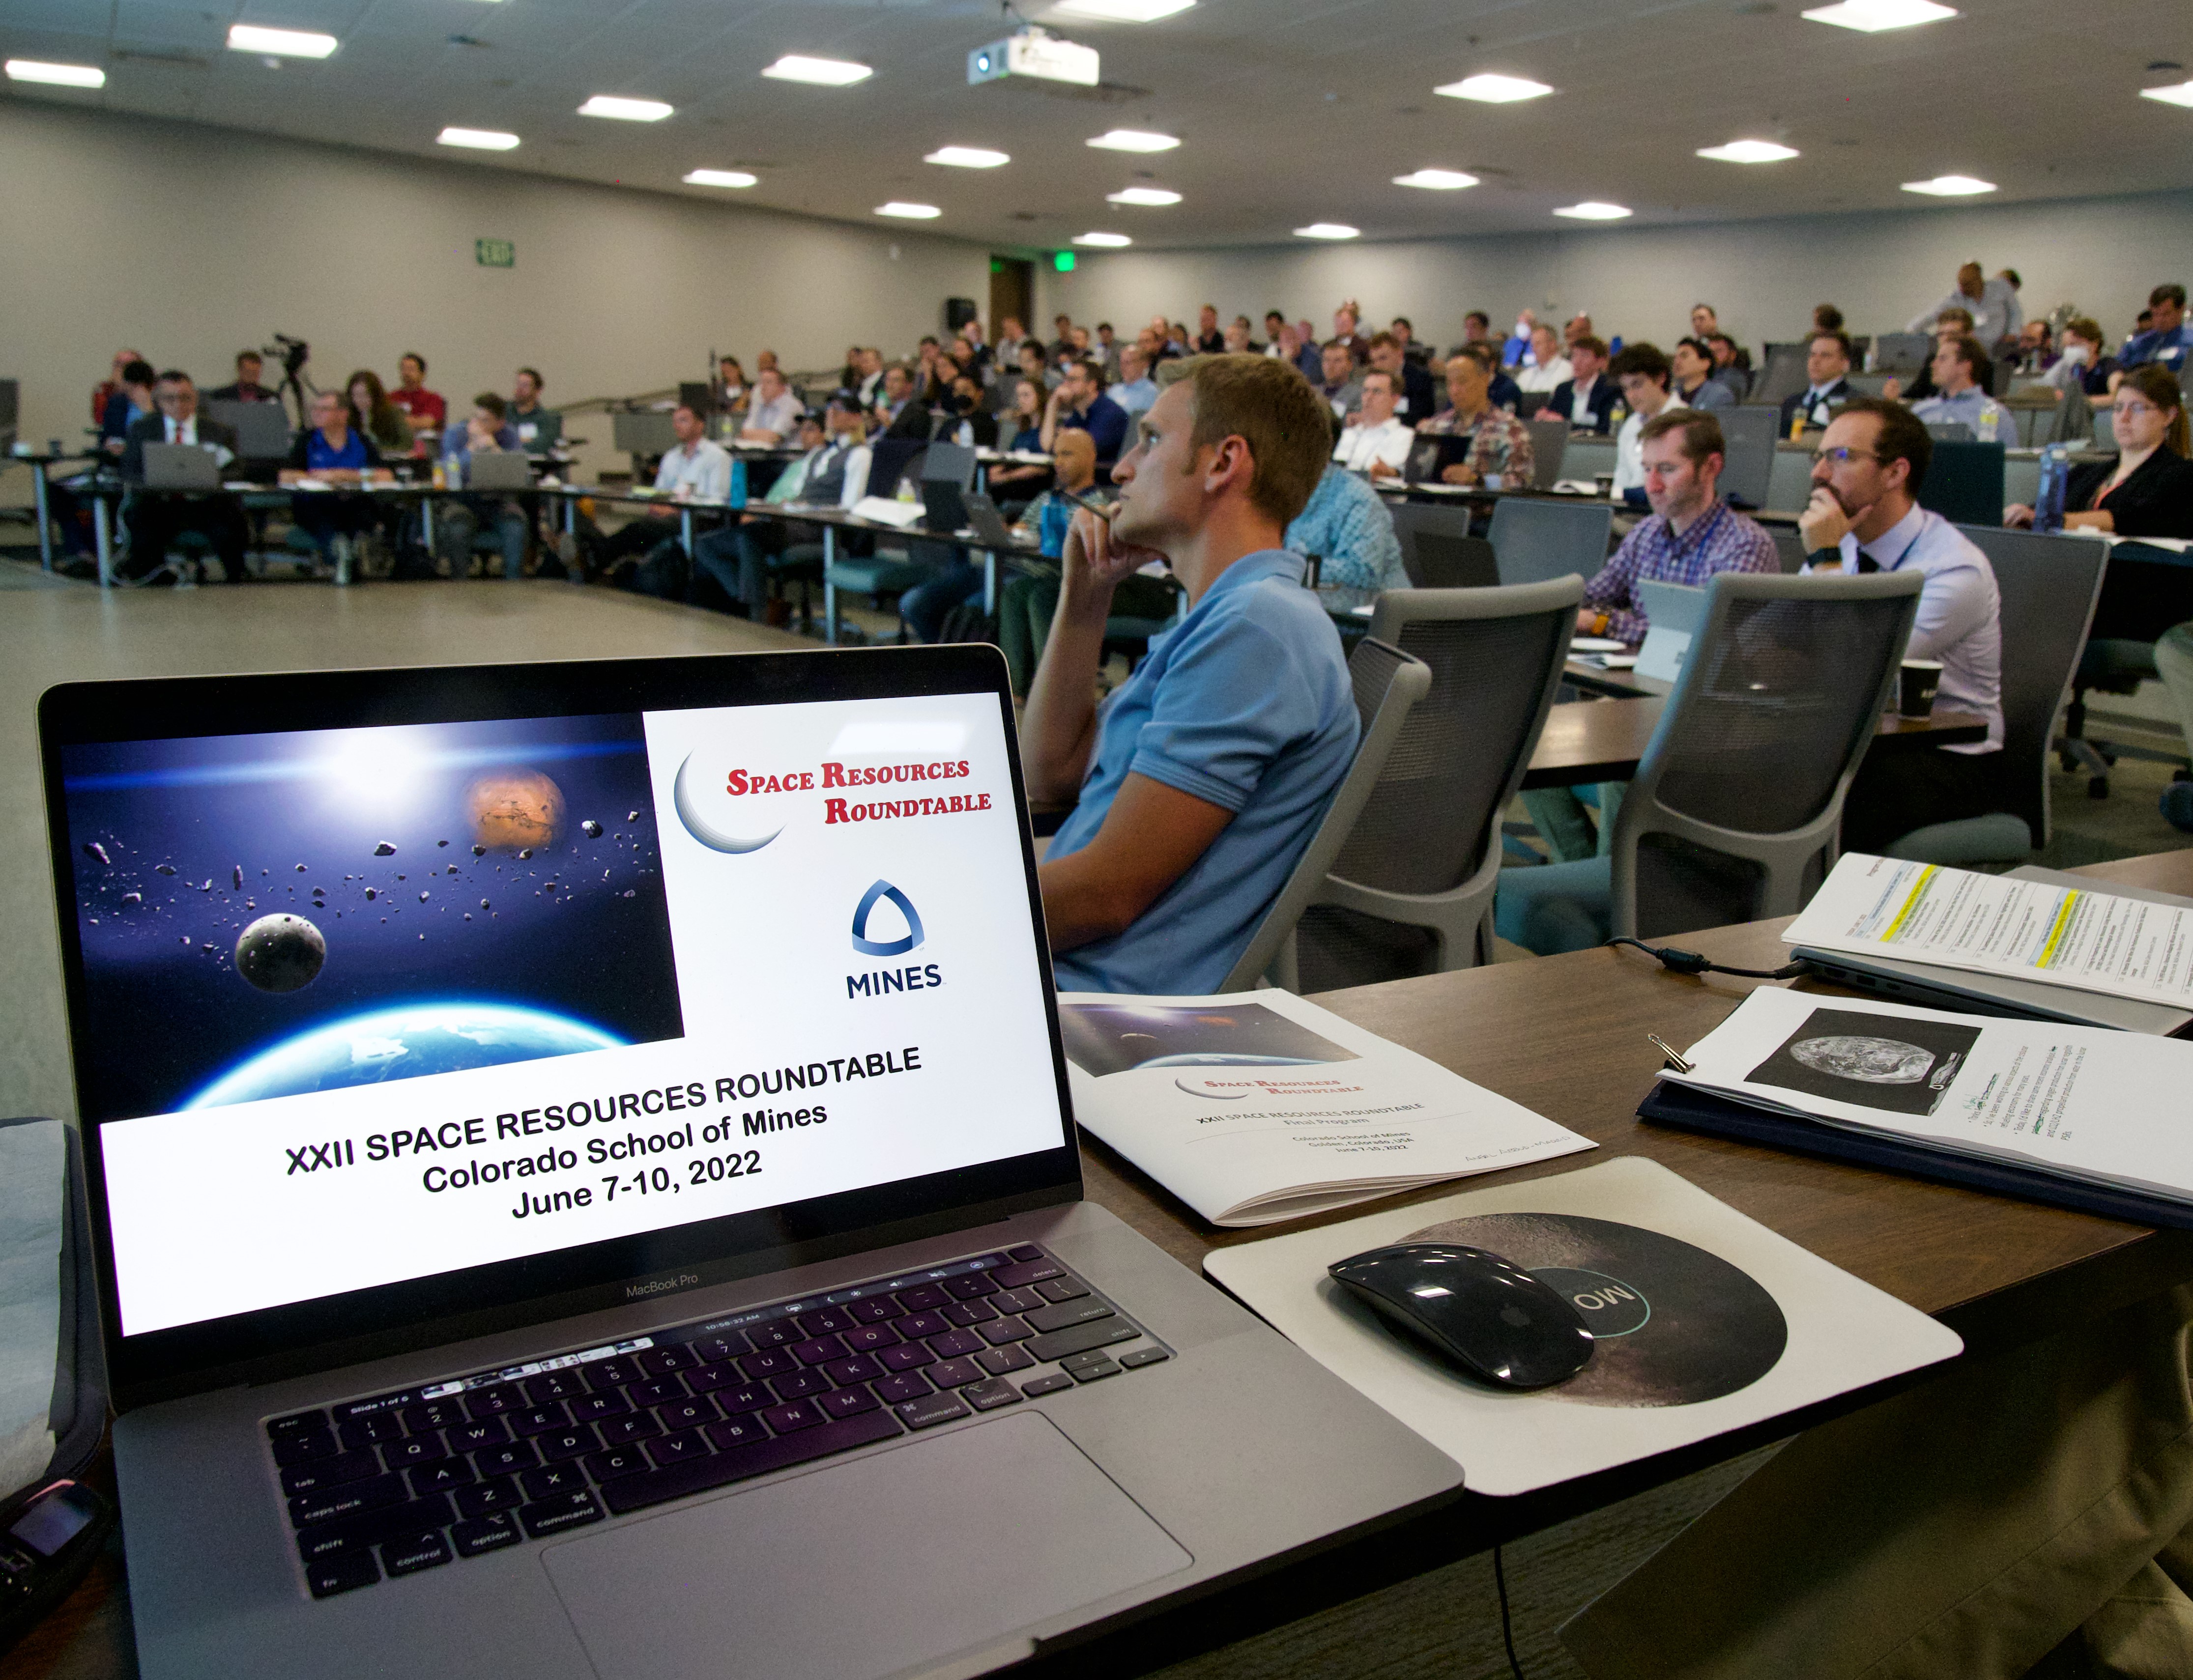 Experts gather at the Colorado School of Mines to participate in a roundtable on space resources that includes scientists, engineers, entrepreneurs, mining and minerals industry specialists, legal experts and policymakers.